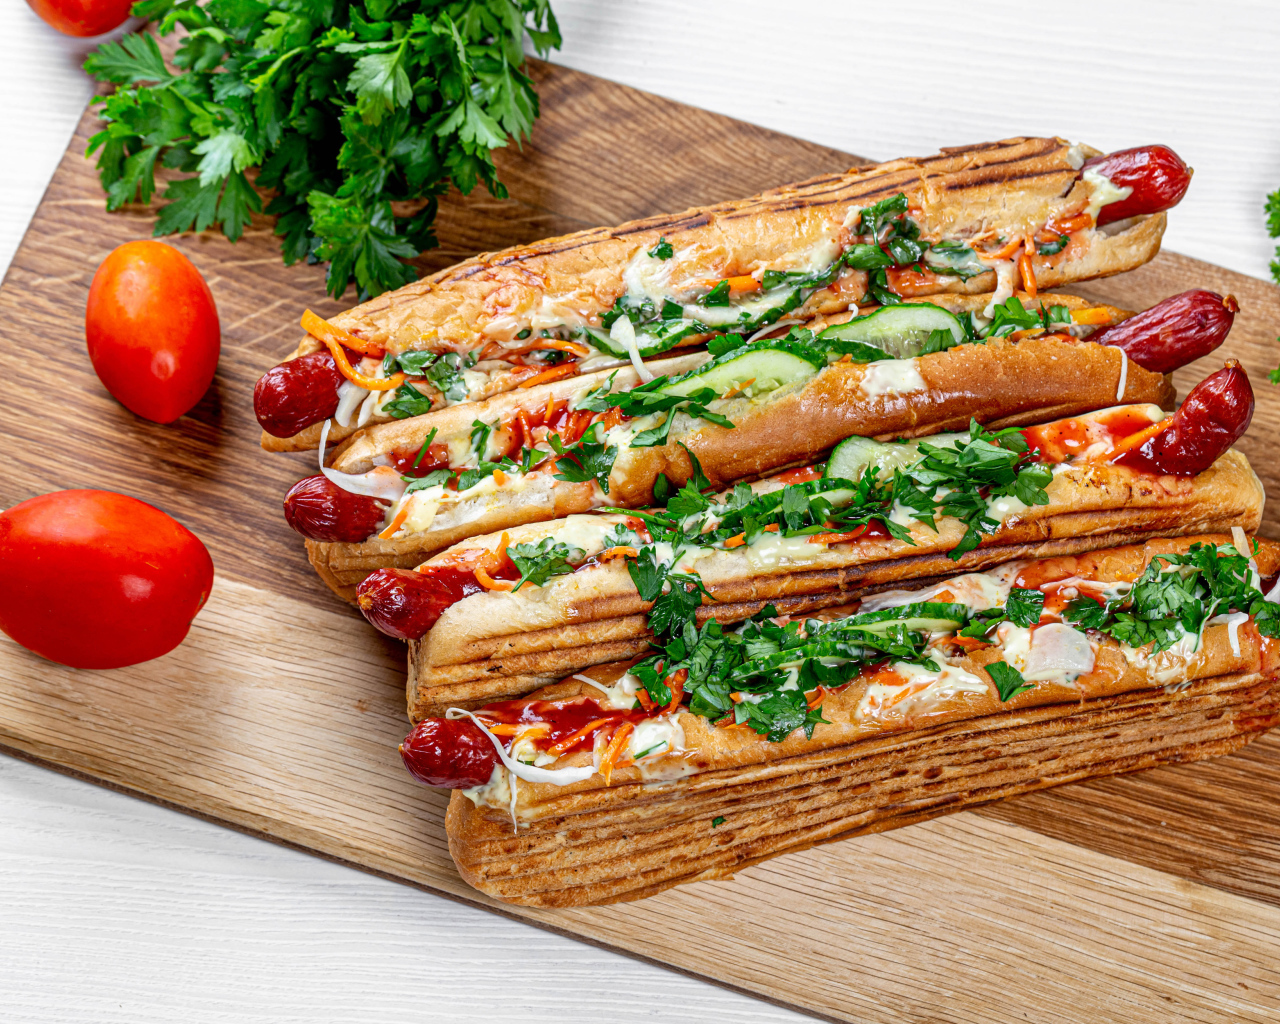 Hot dogs on a board with parsley and red tomatoes and parsley